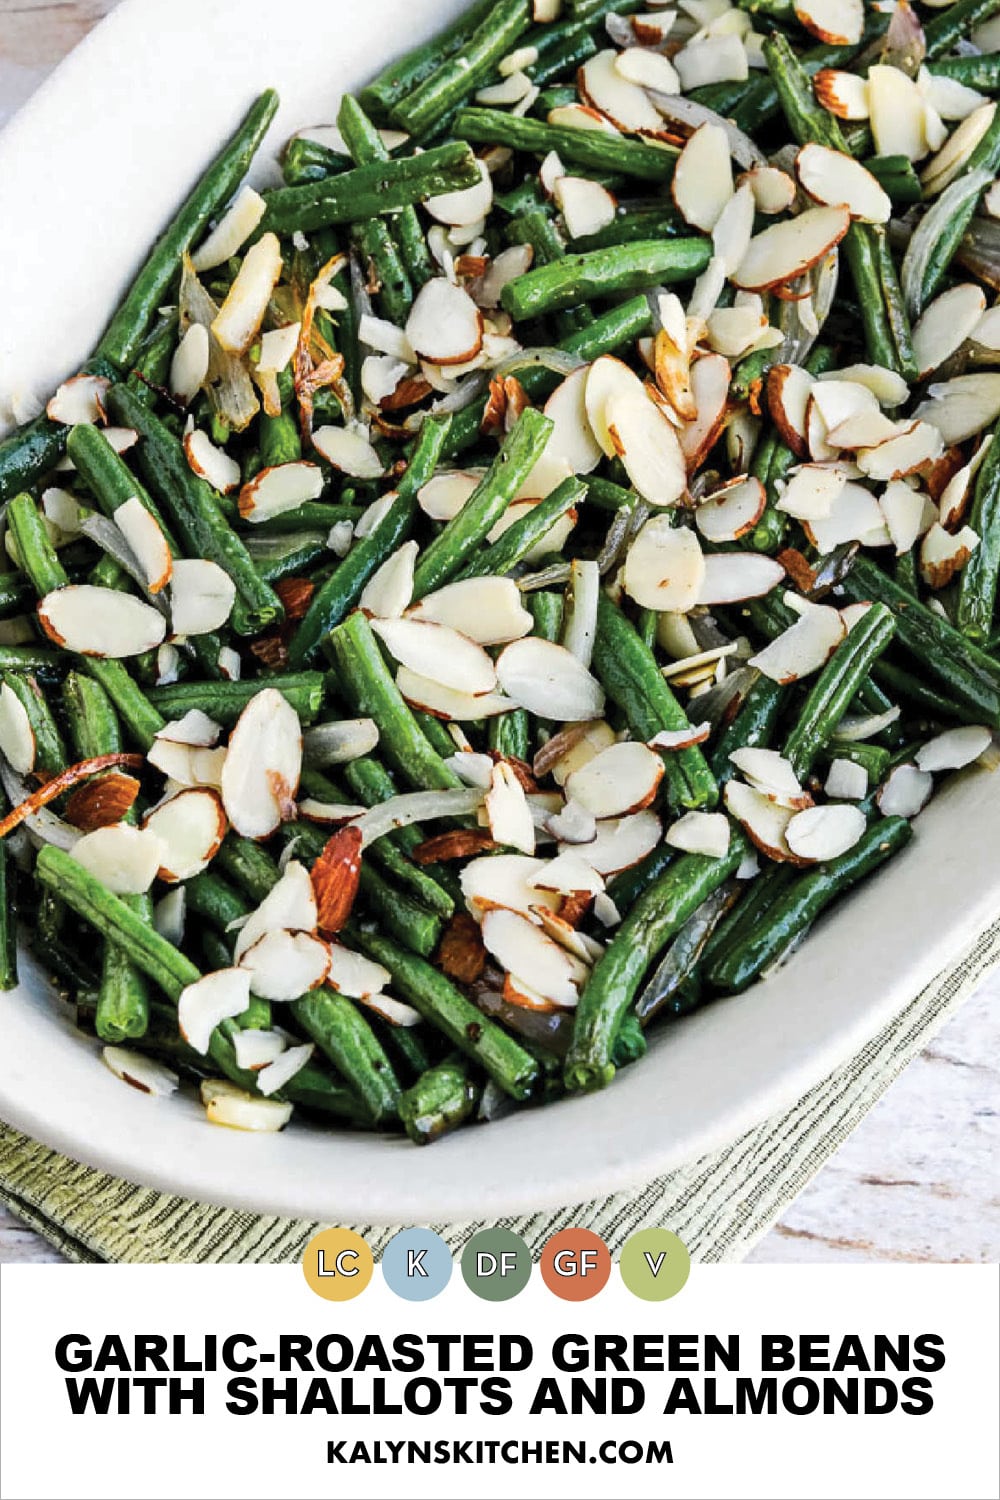 Pinterest image of Garlic-Roasted Green Beans with Shallots and Almonds